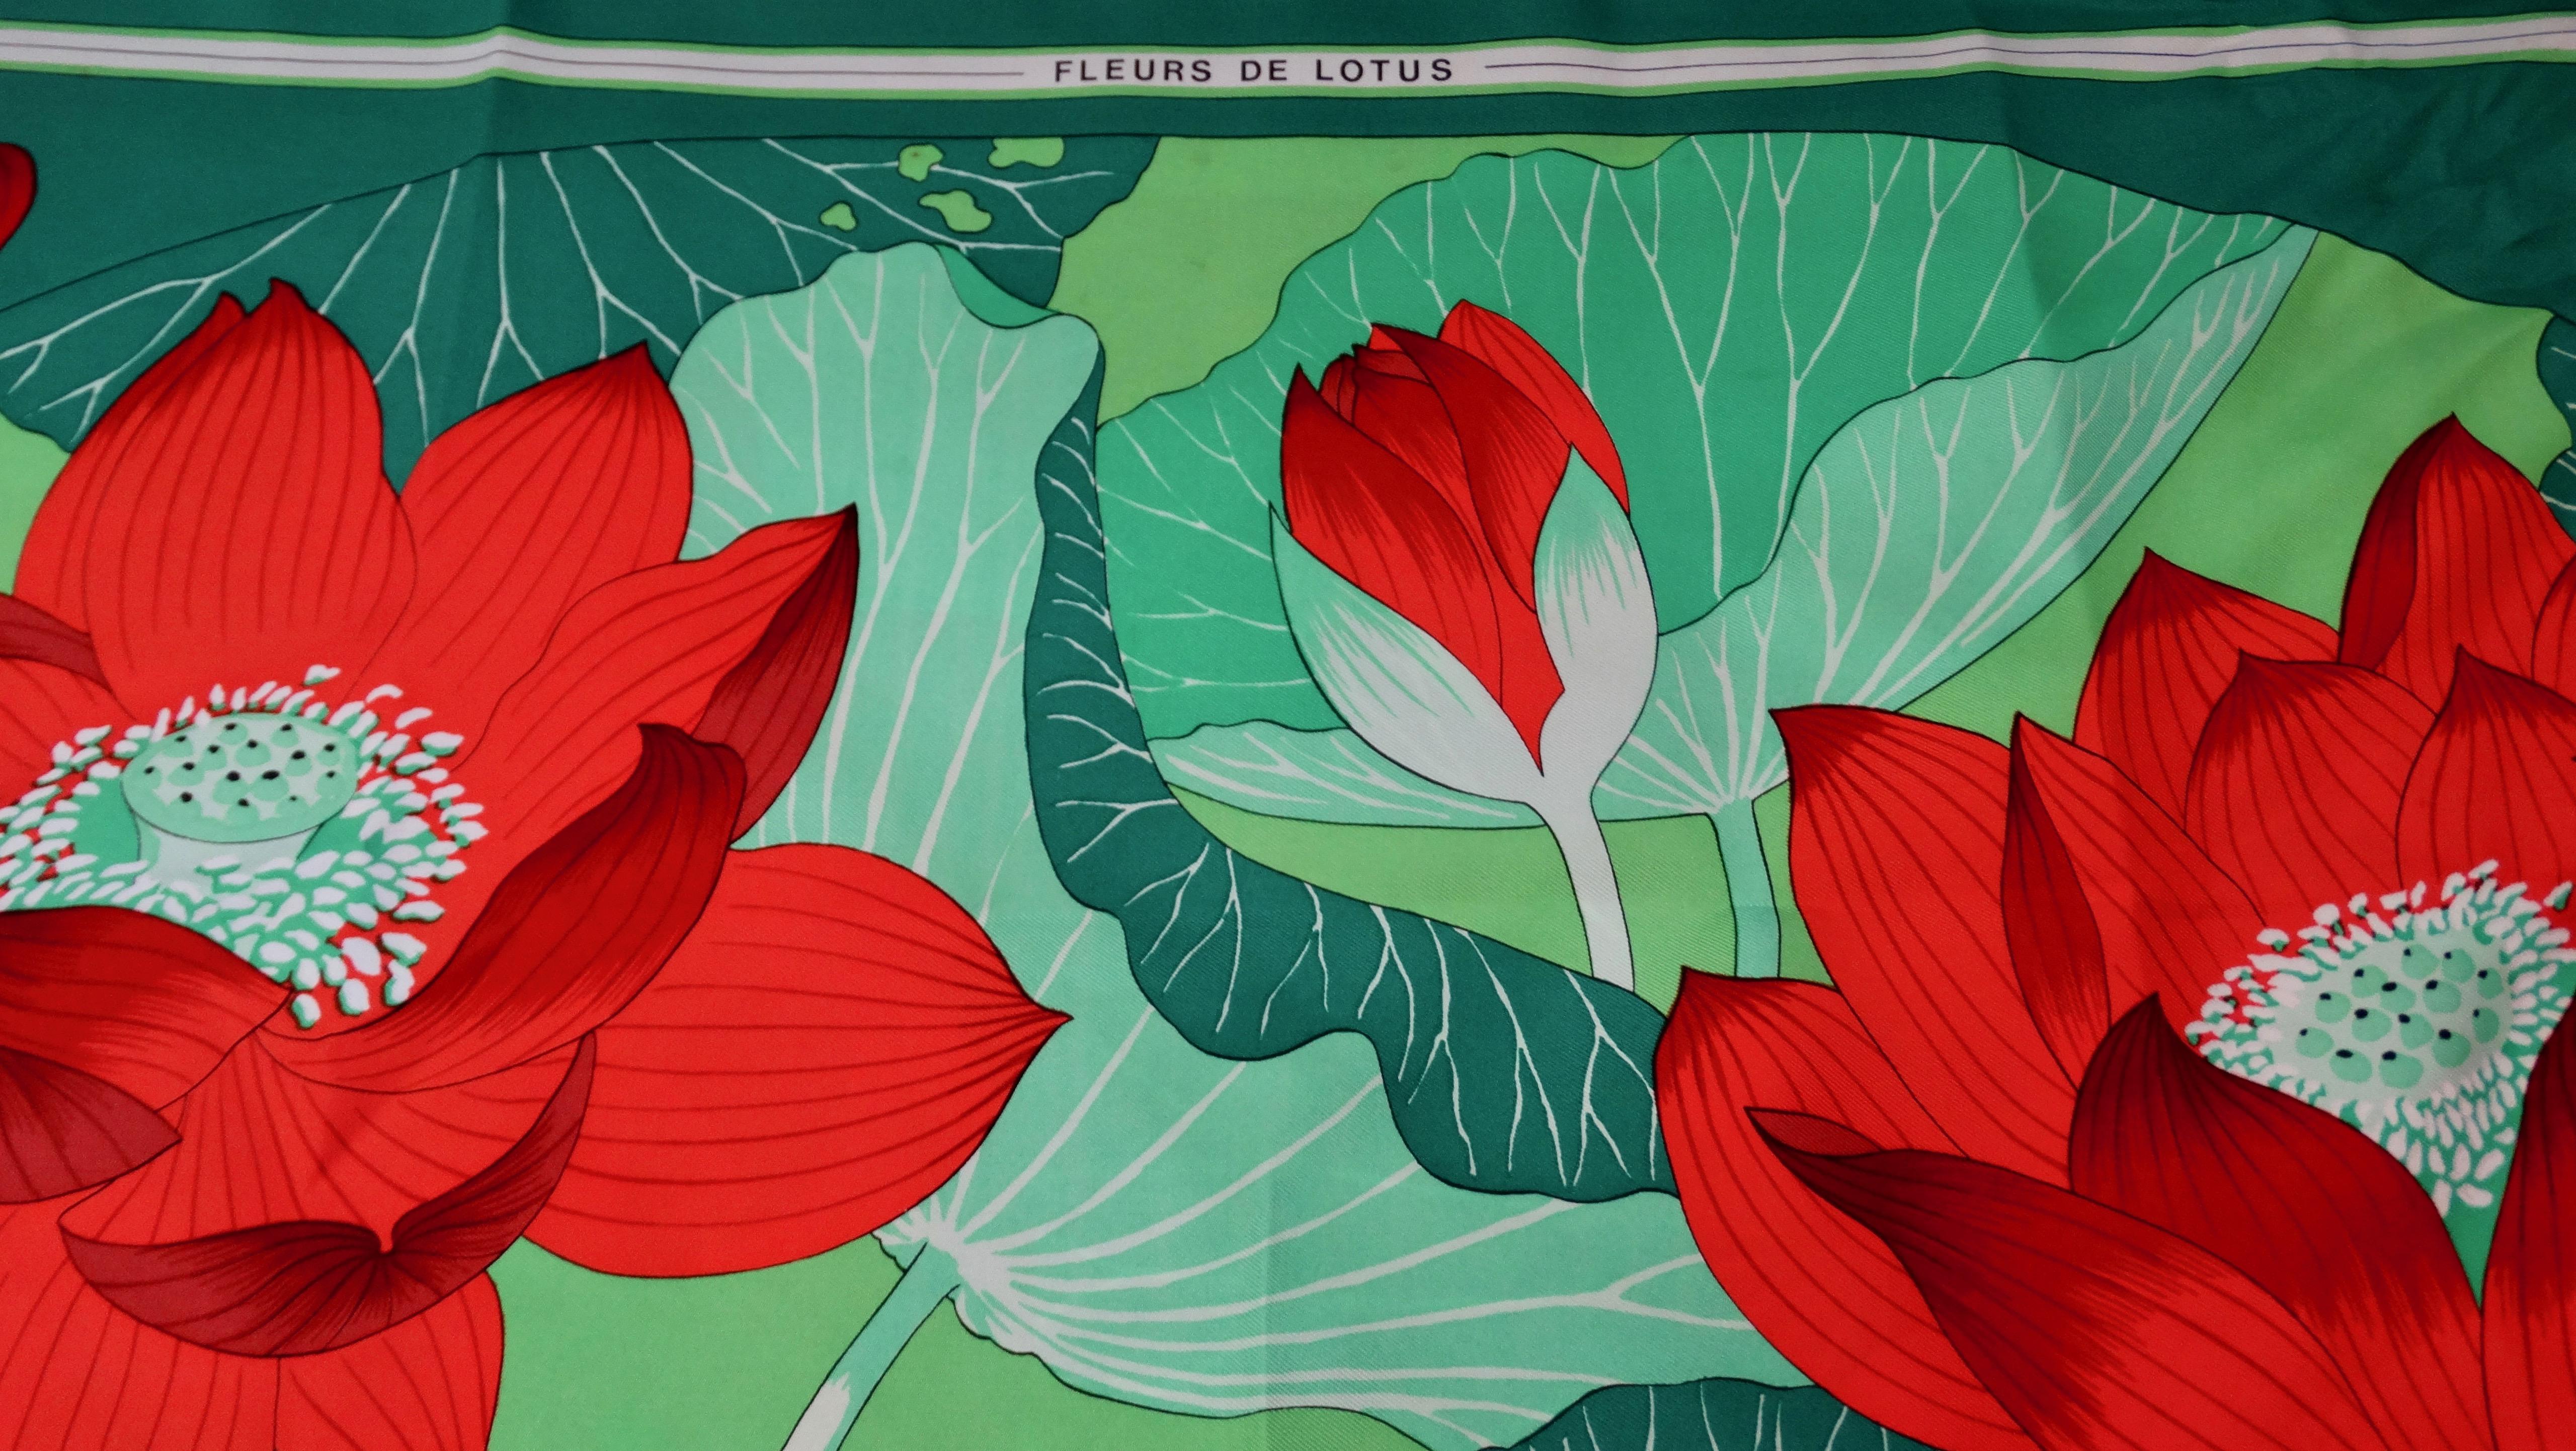 We all need a great Hermés scarf! Circa 1976, this 100% Silk scarf features a beautiful motif designed by Christiane Vauzelles titled, 'Fleurs De Lotus.' Includes large red lotus flowers surrounded by various contrasting shades of green vegetation.